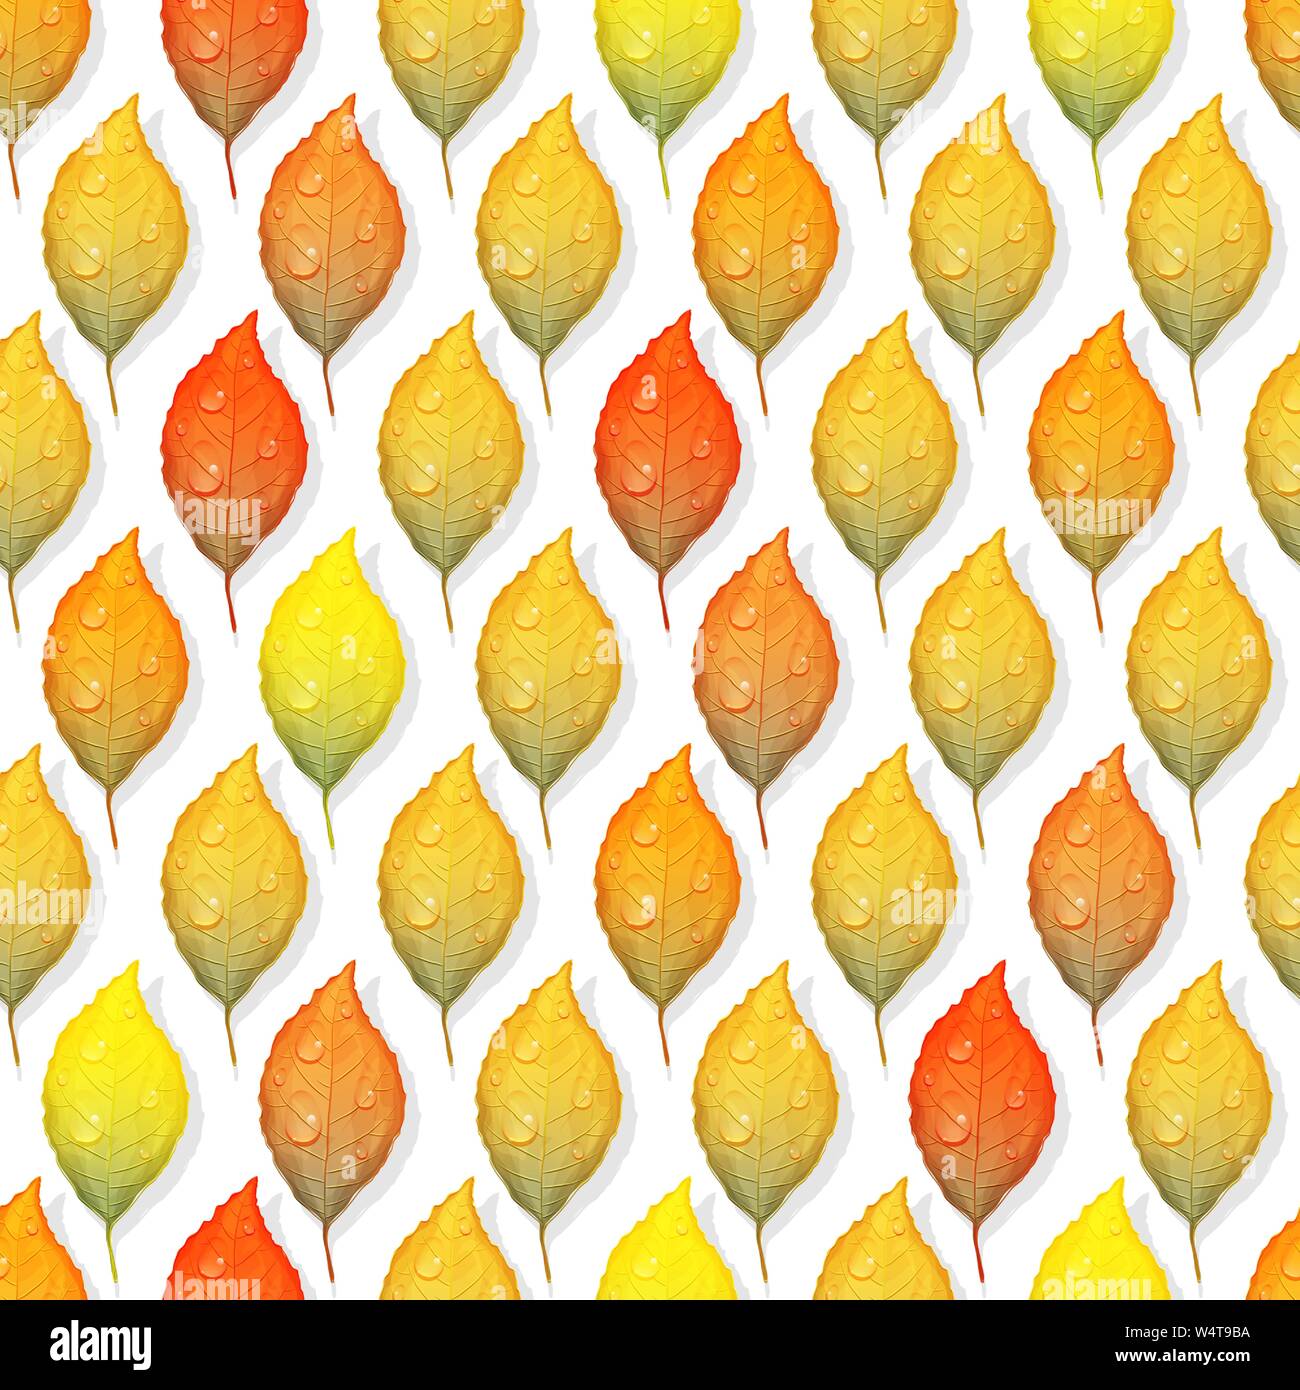 Colorful autumn leaves seamless pattern background. Vector illustration Stock Vector